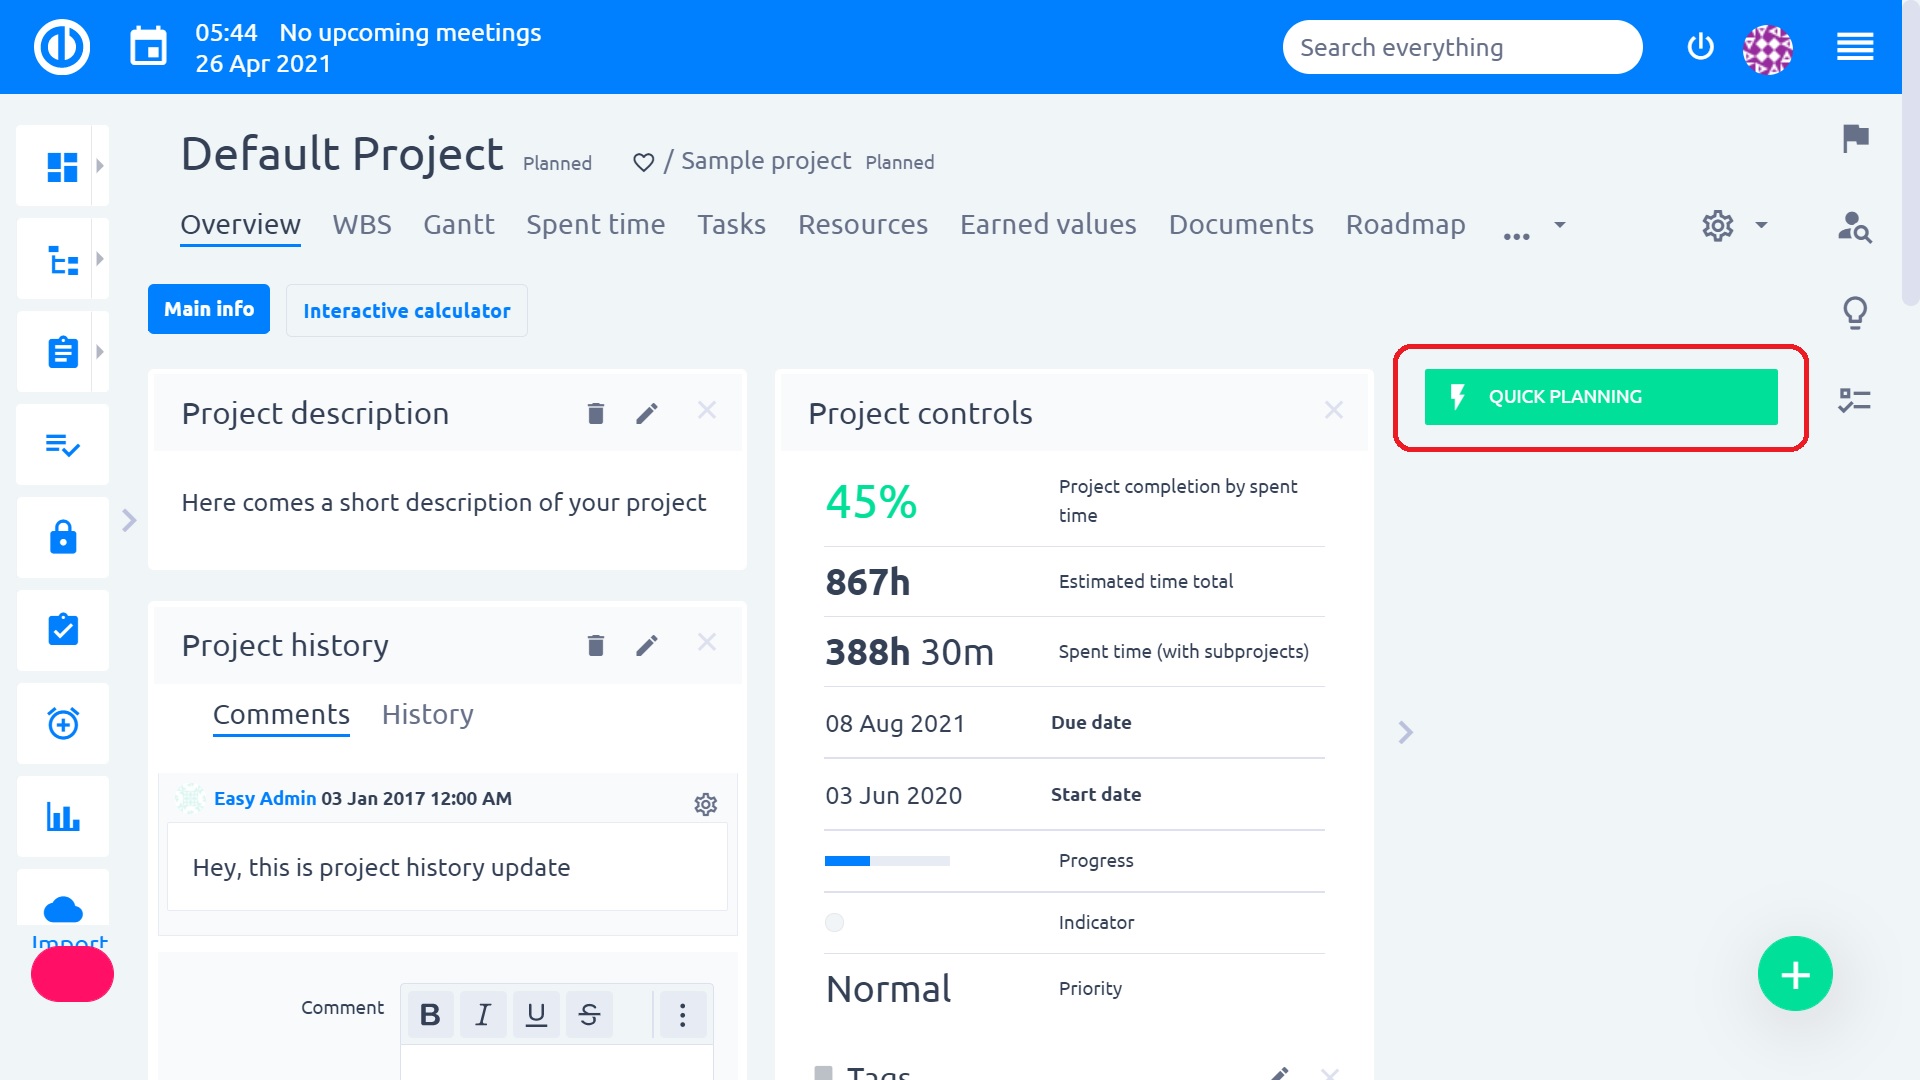 Easy Redmine 2018 - Quick project planner - Quick planning button